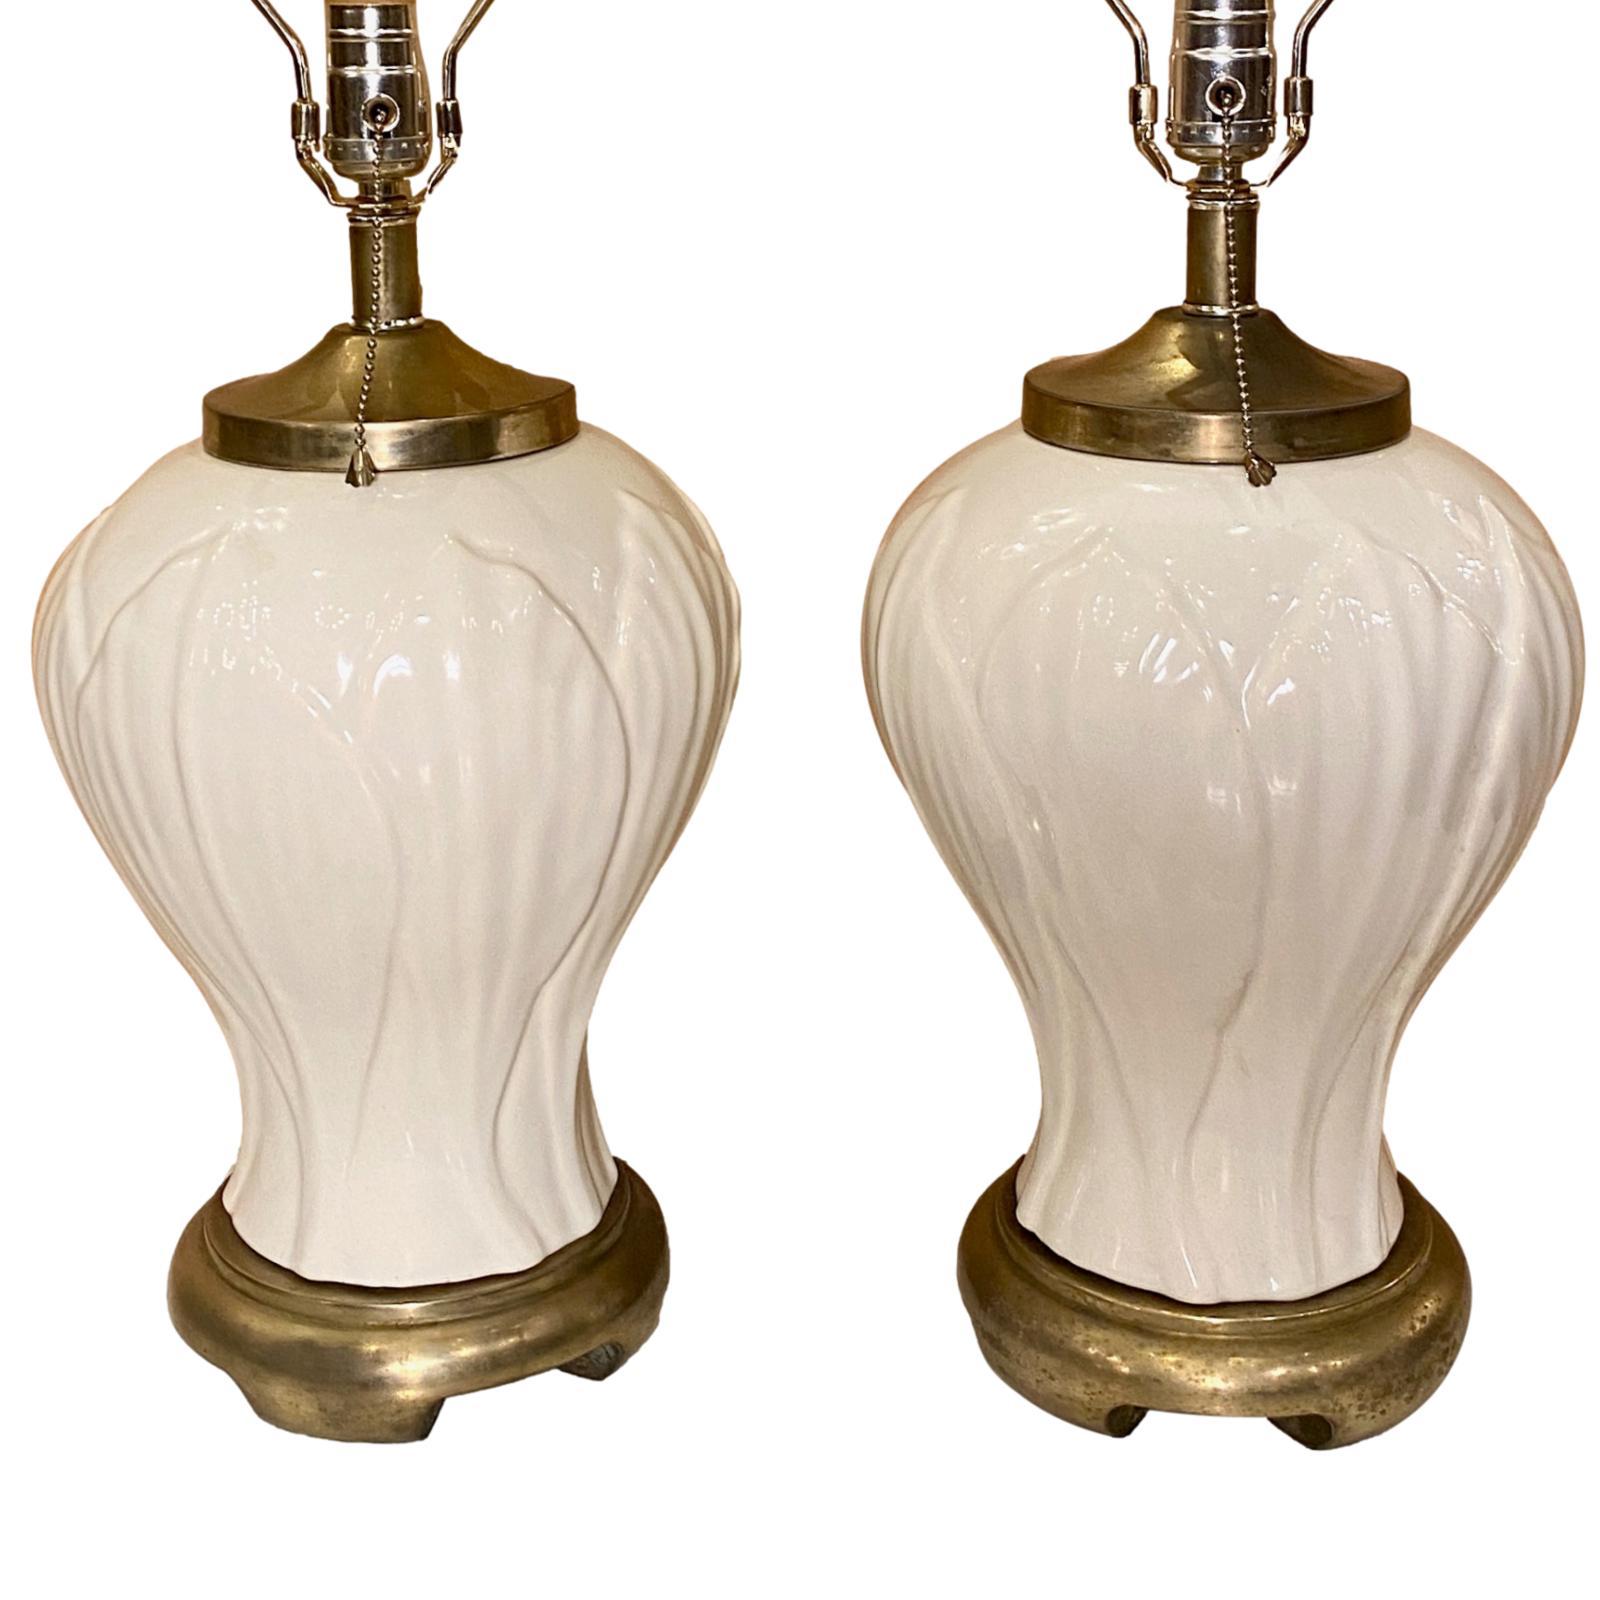 Pair of circa 1940's French porcelain lamps with leaf pattern on body and metal bases.

Measurements:
Height of body: 16